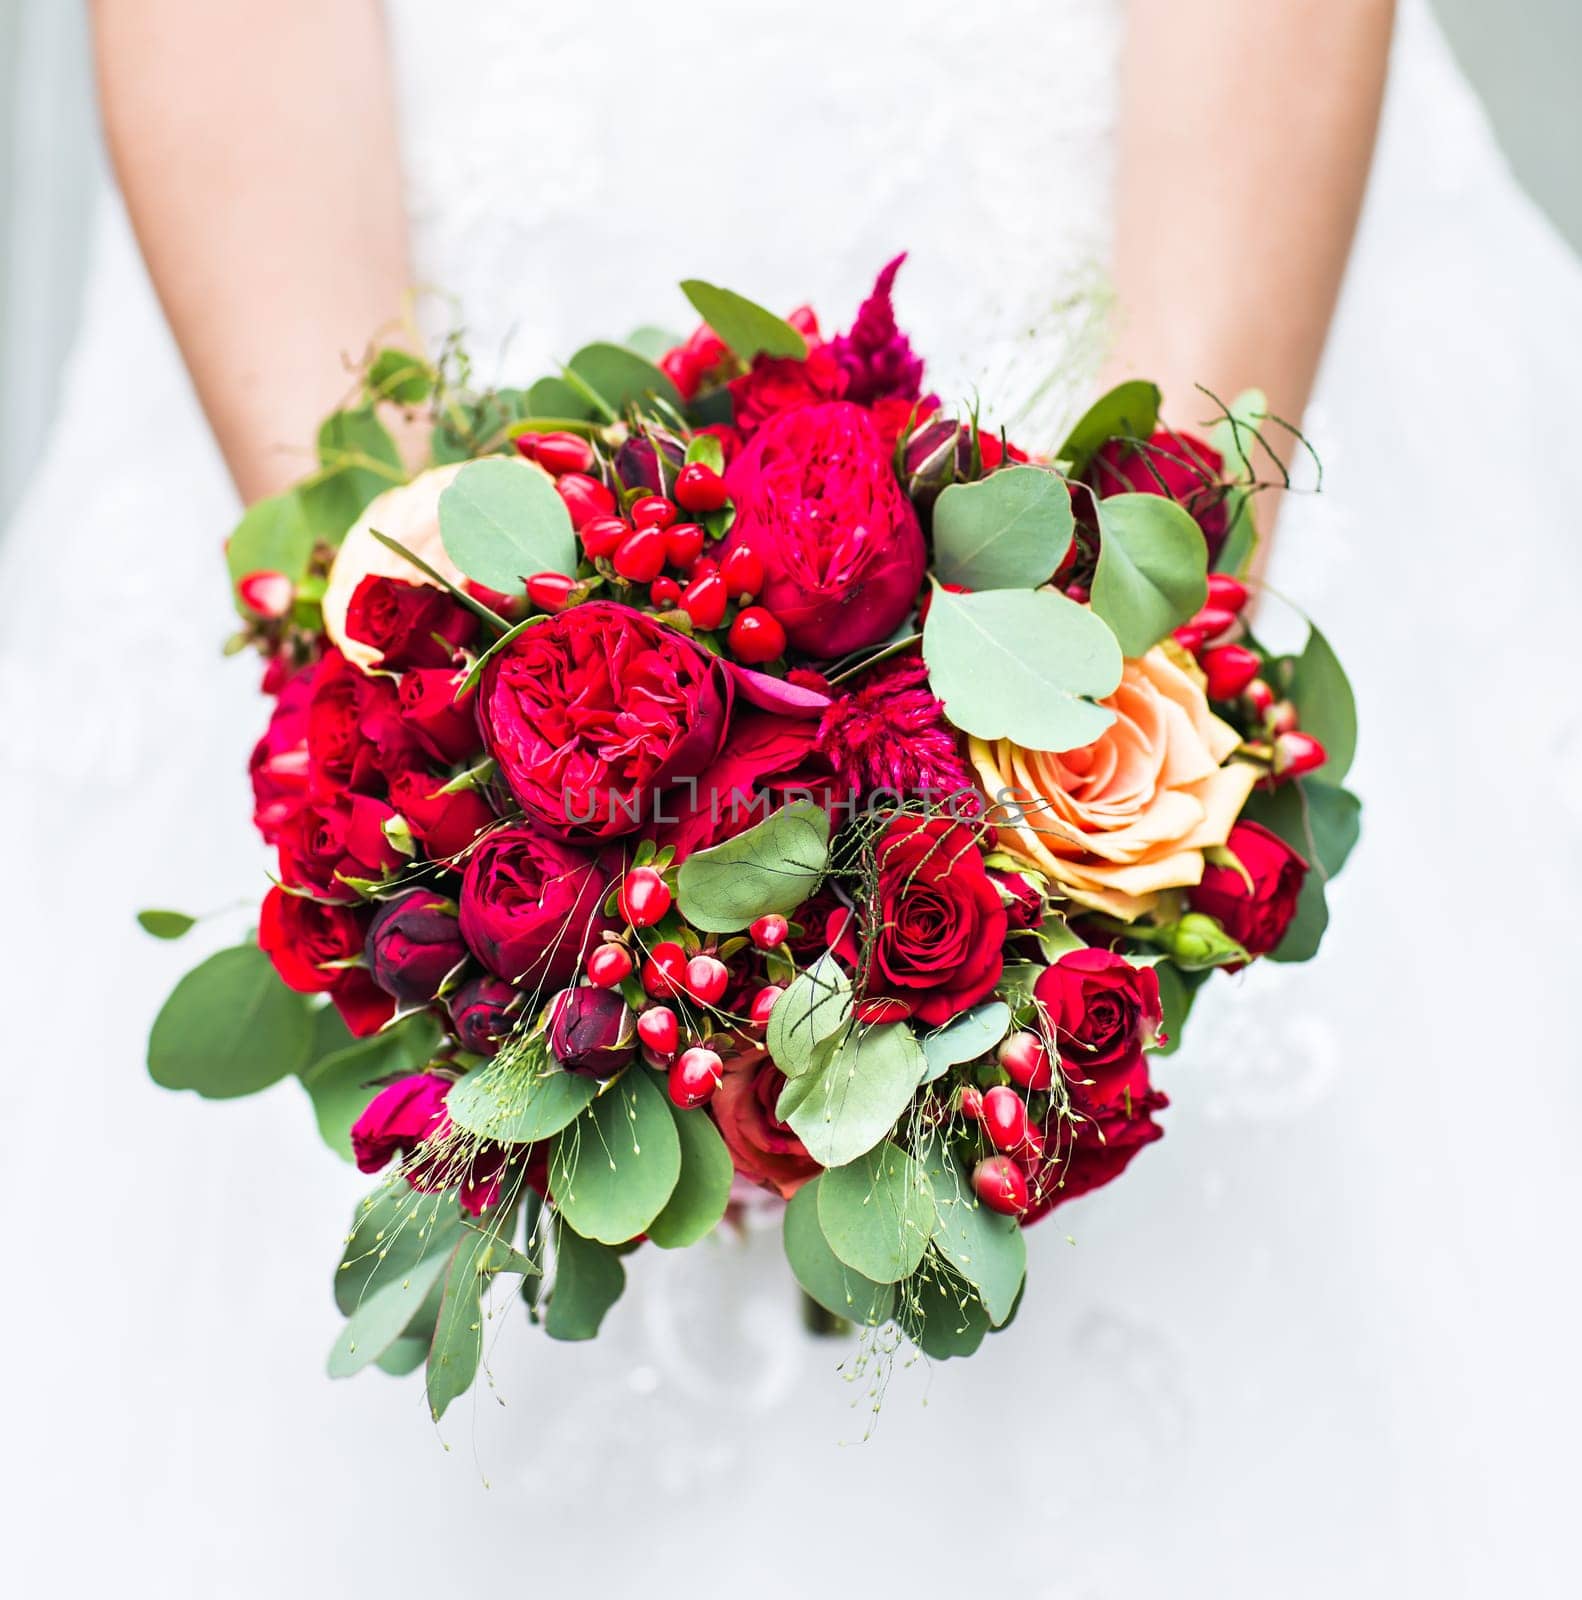 Beautiful wedding bouquet in hands of the bride close-up by Satura86